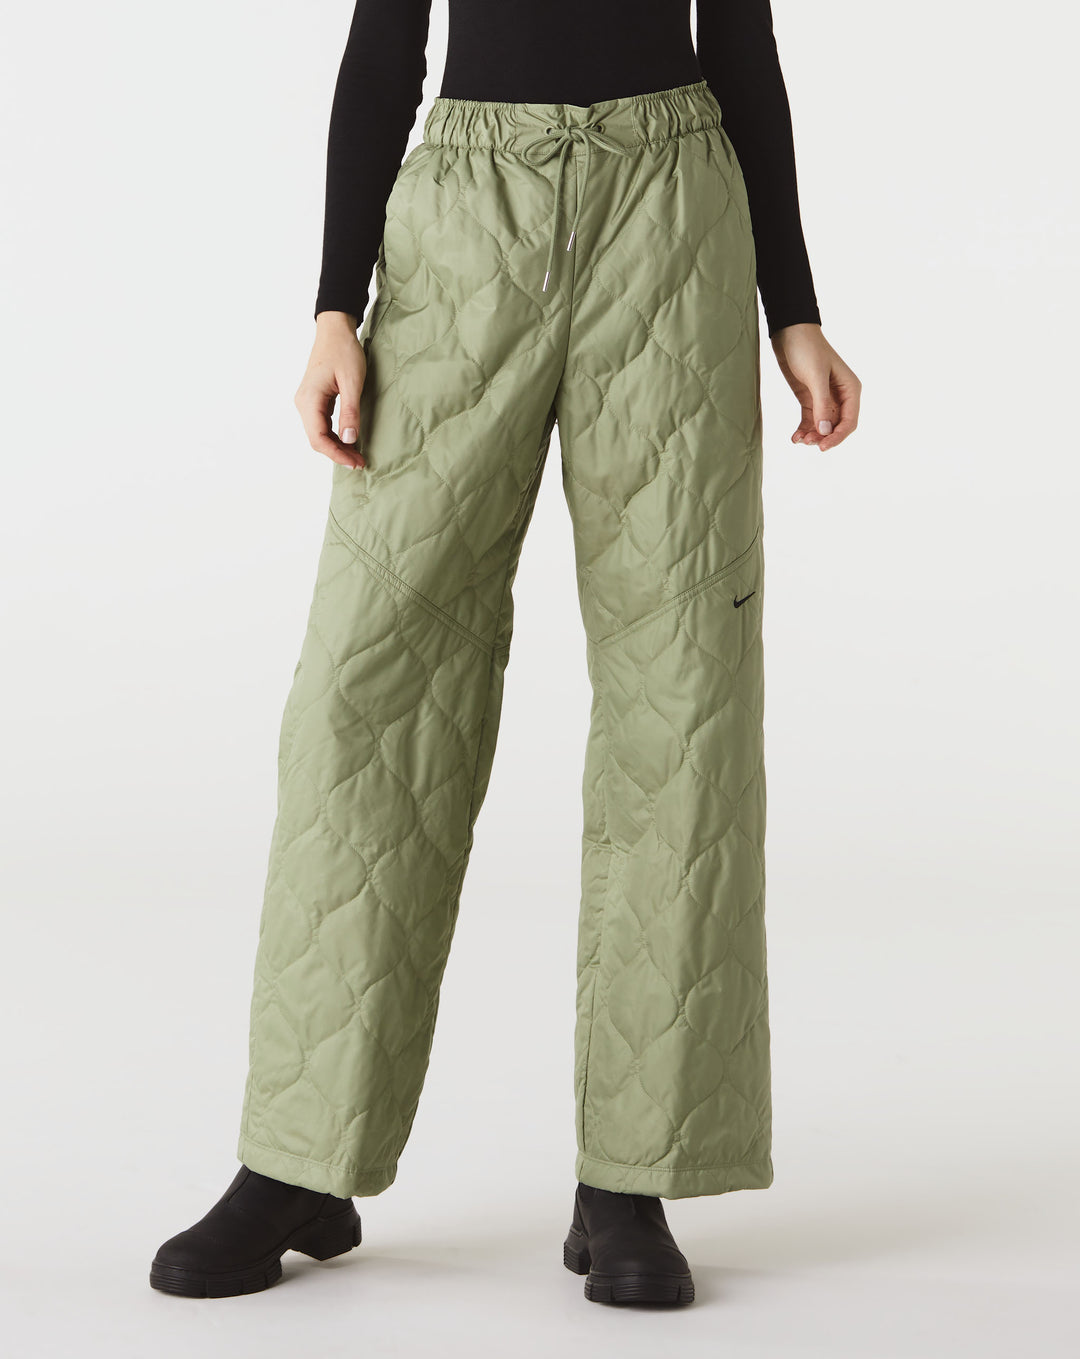 Nike Women's Quilted High-Waisted Open Hem Pants  - XHIBITION